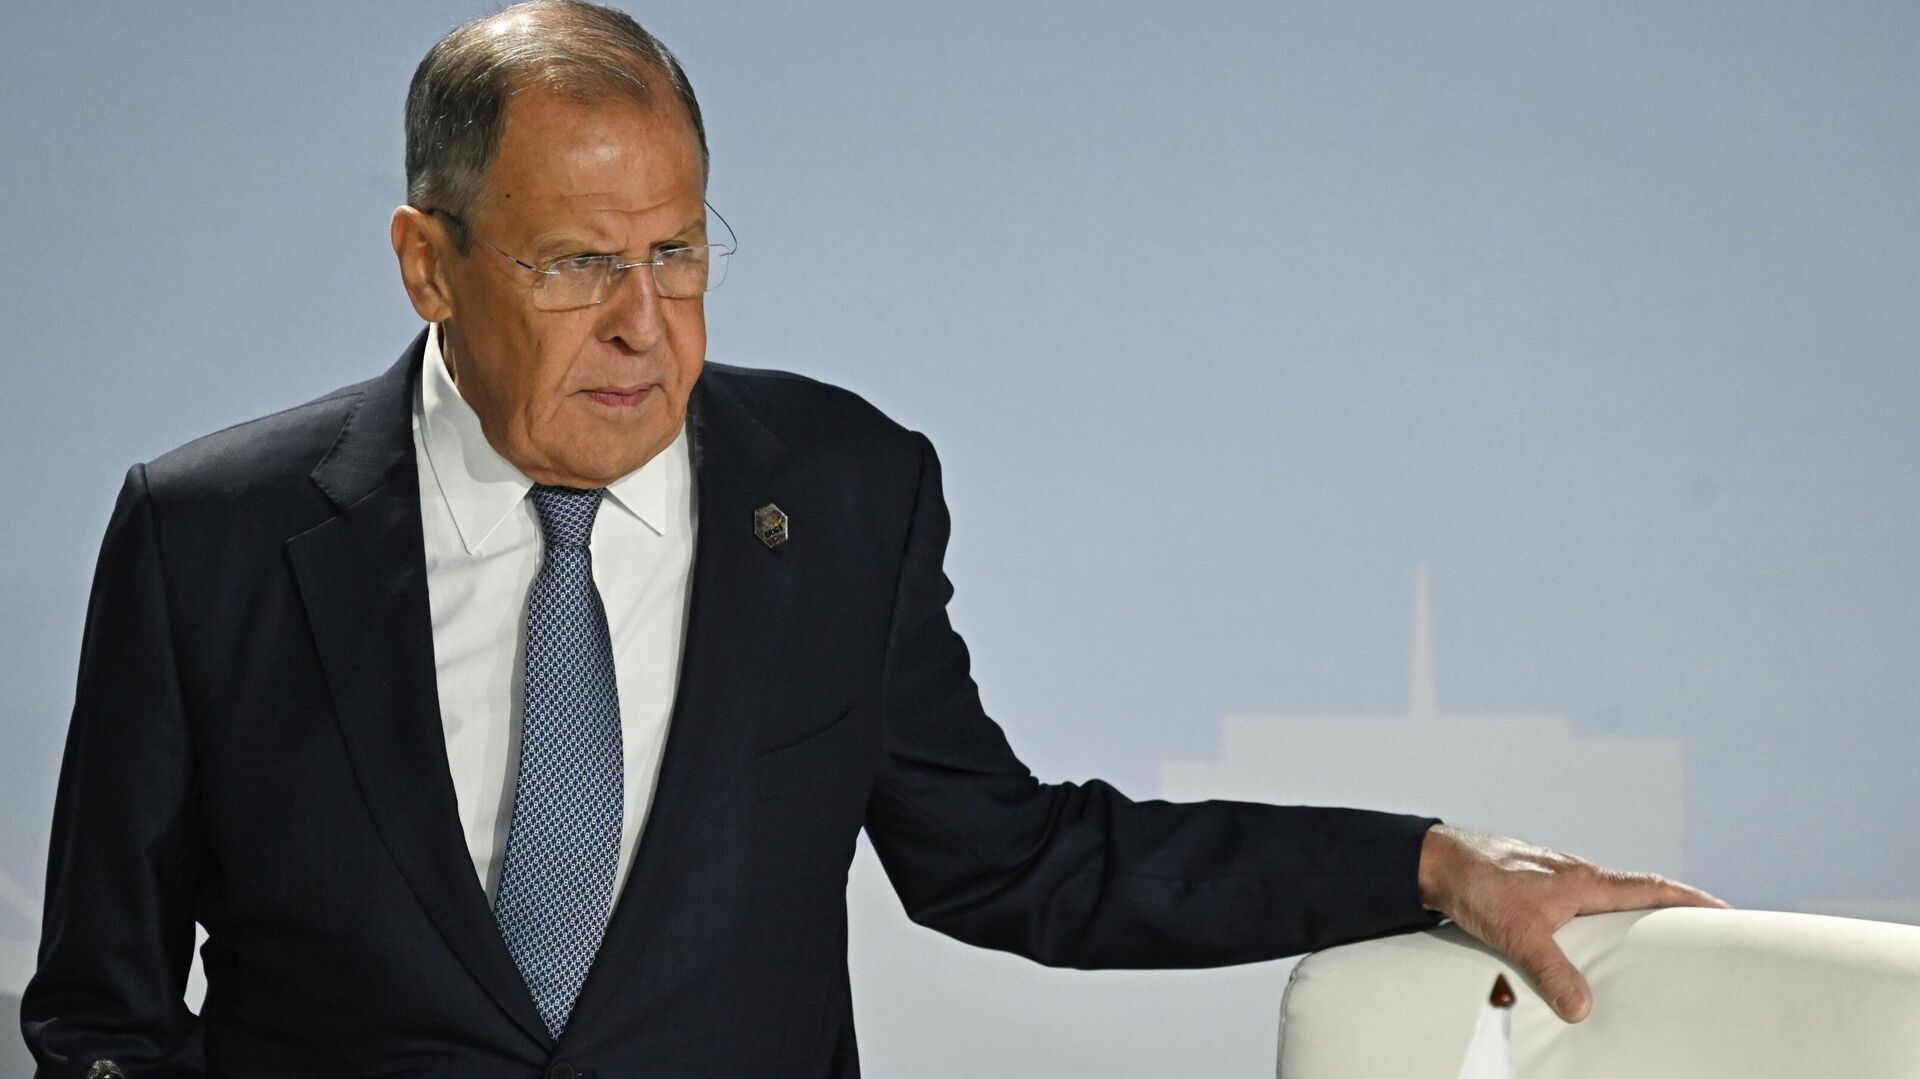 Russian Foreign Minister Sergey Lavrov at the closing press conference after the joint meeting of BRICS leaders with leaders of invited countries and multilateral organizations. - Sputnik International, 1920, 19.09.2023